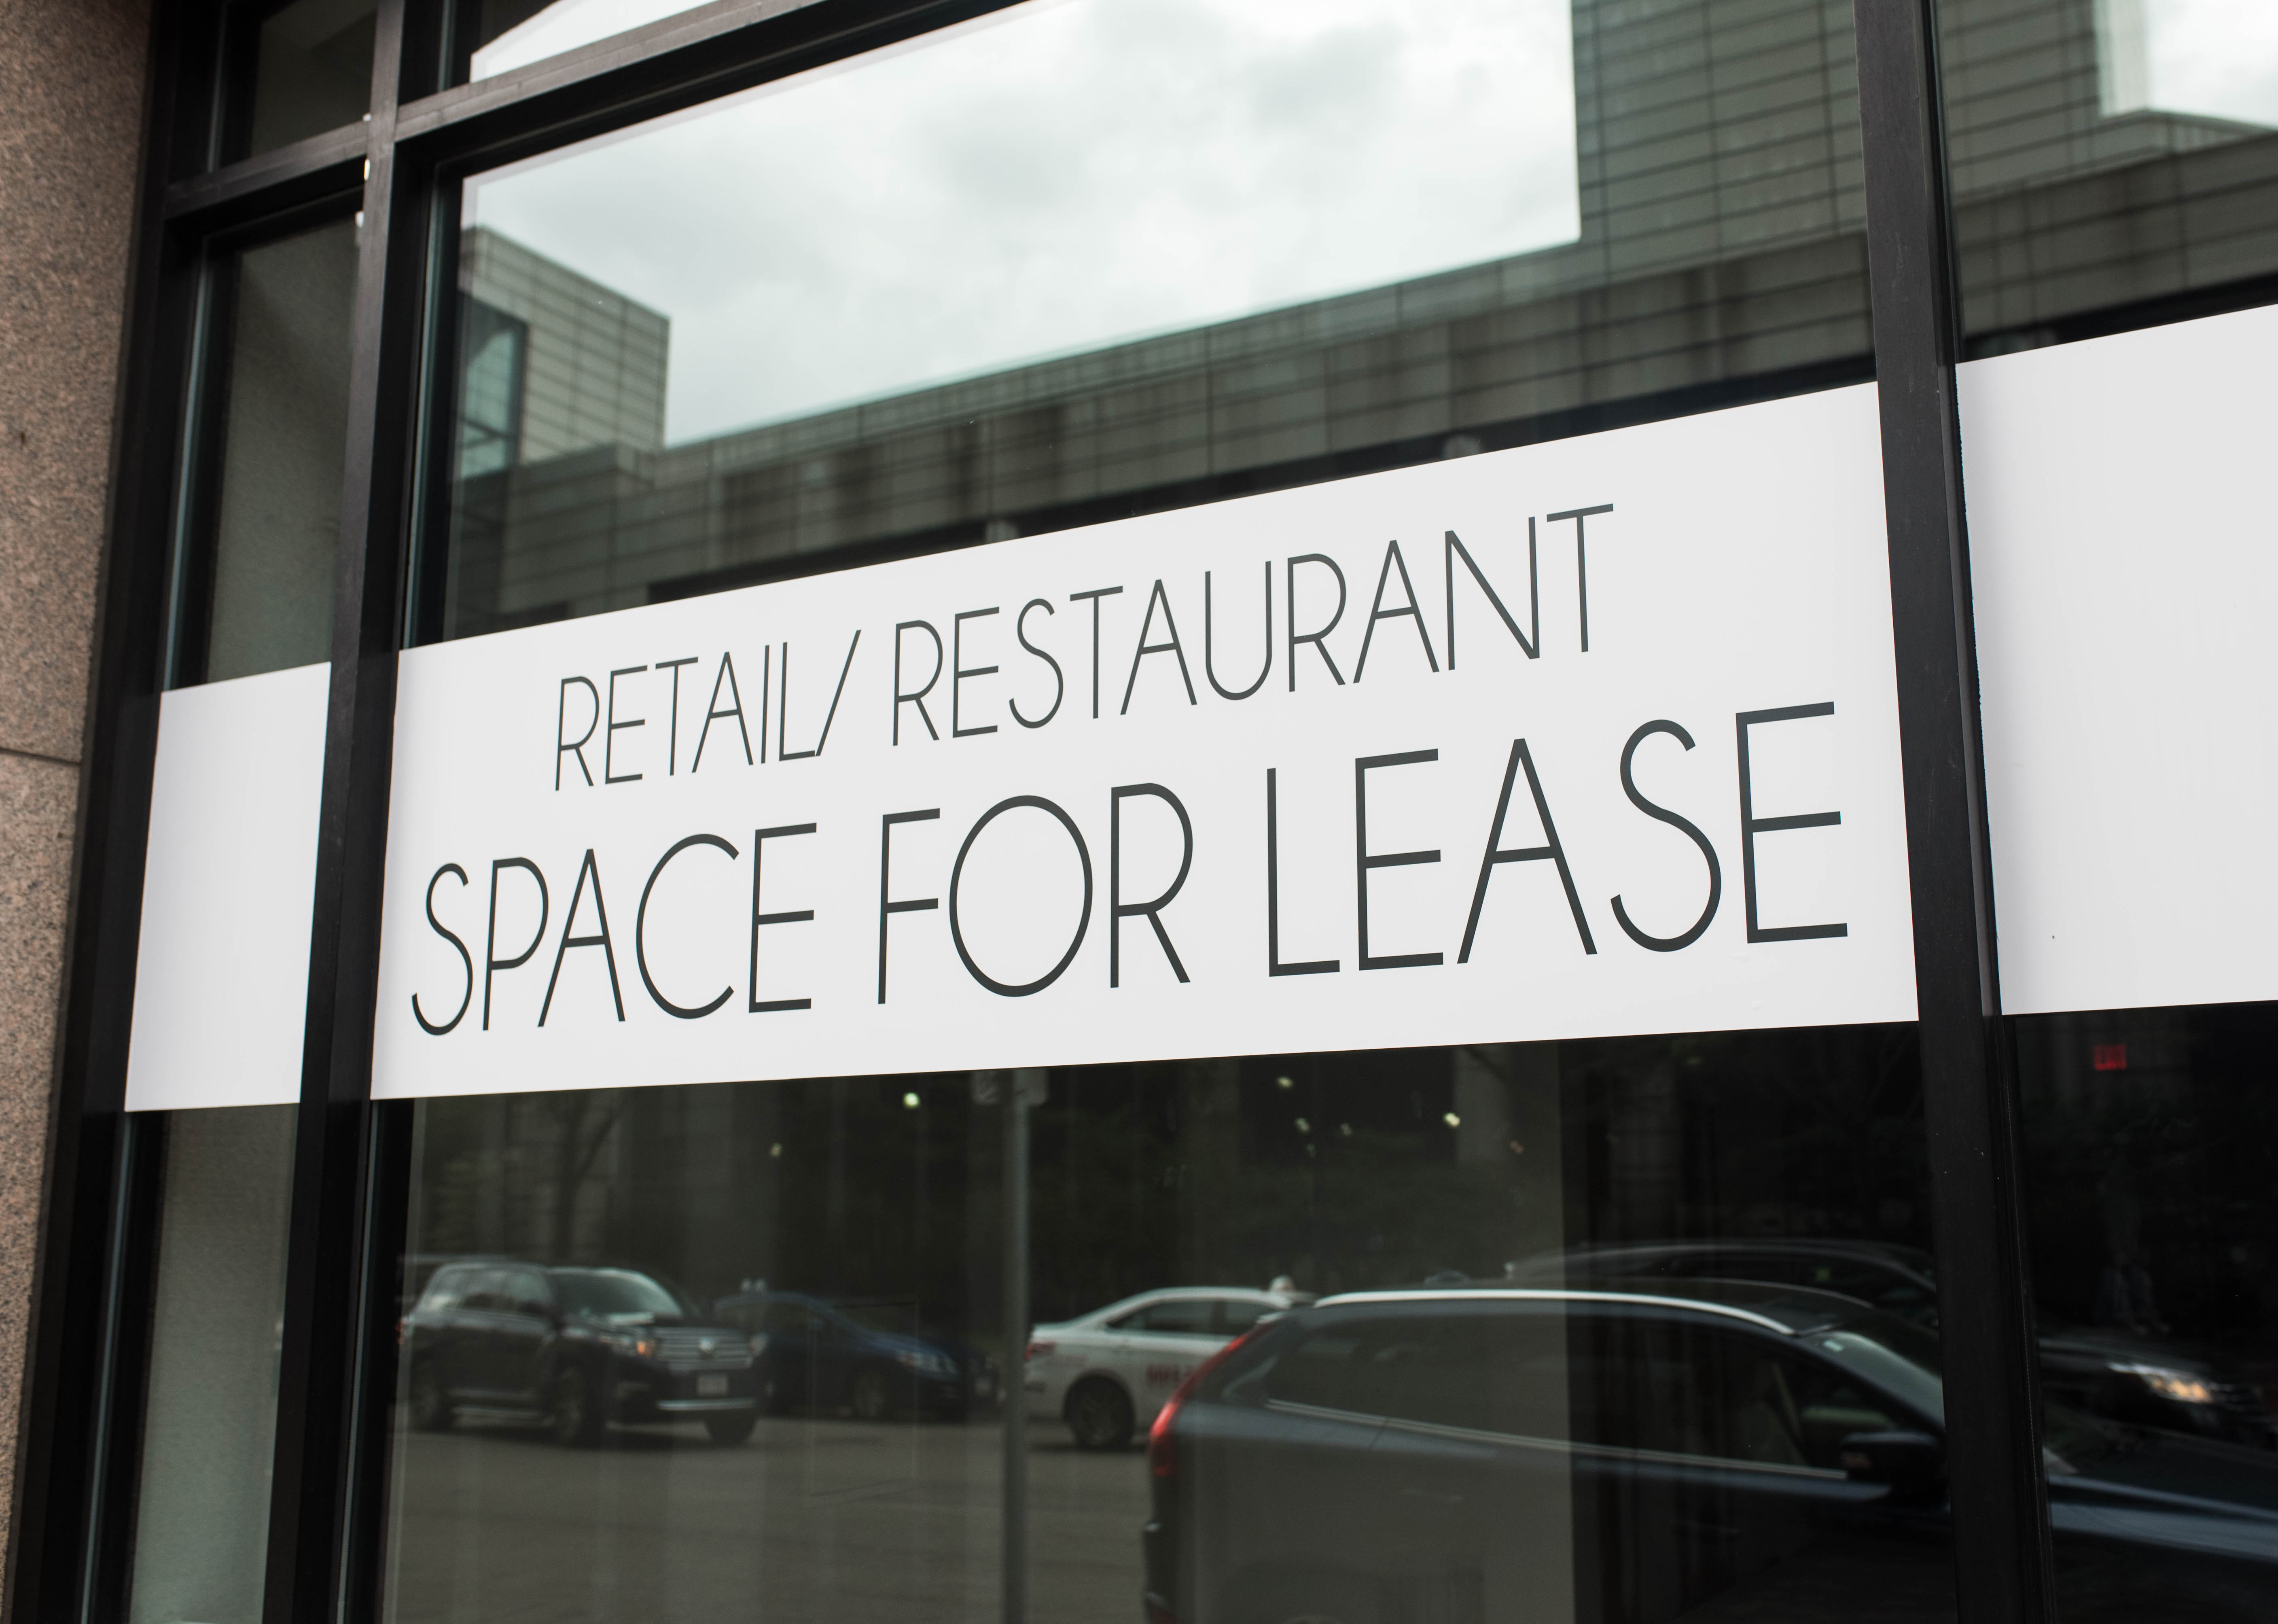 Retail and restaurant space for lease window graphic. 